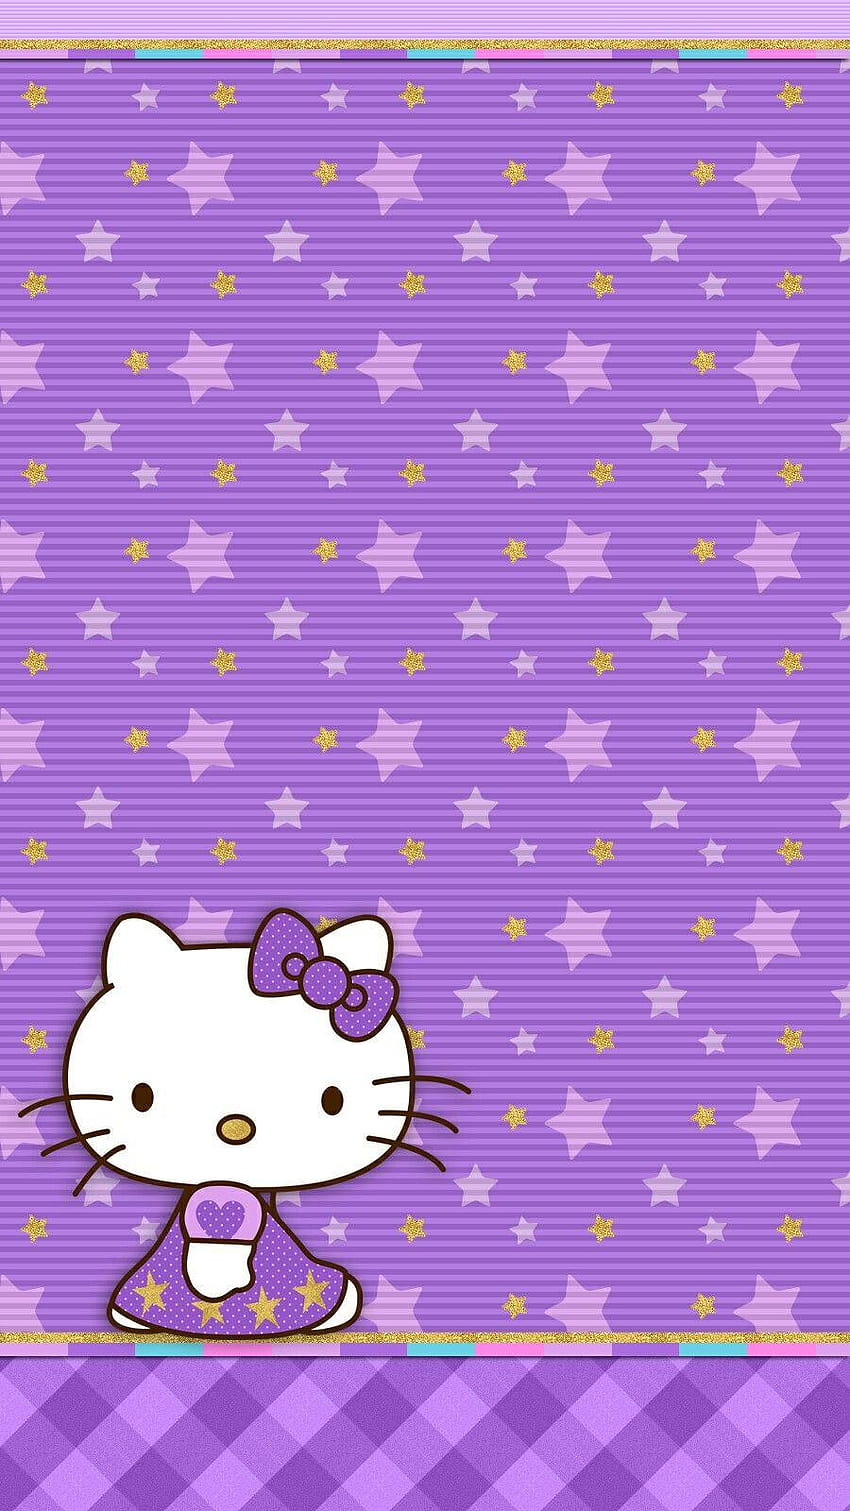  Be Positive   HELLO KITTY WALLPAPERS